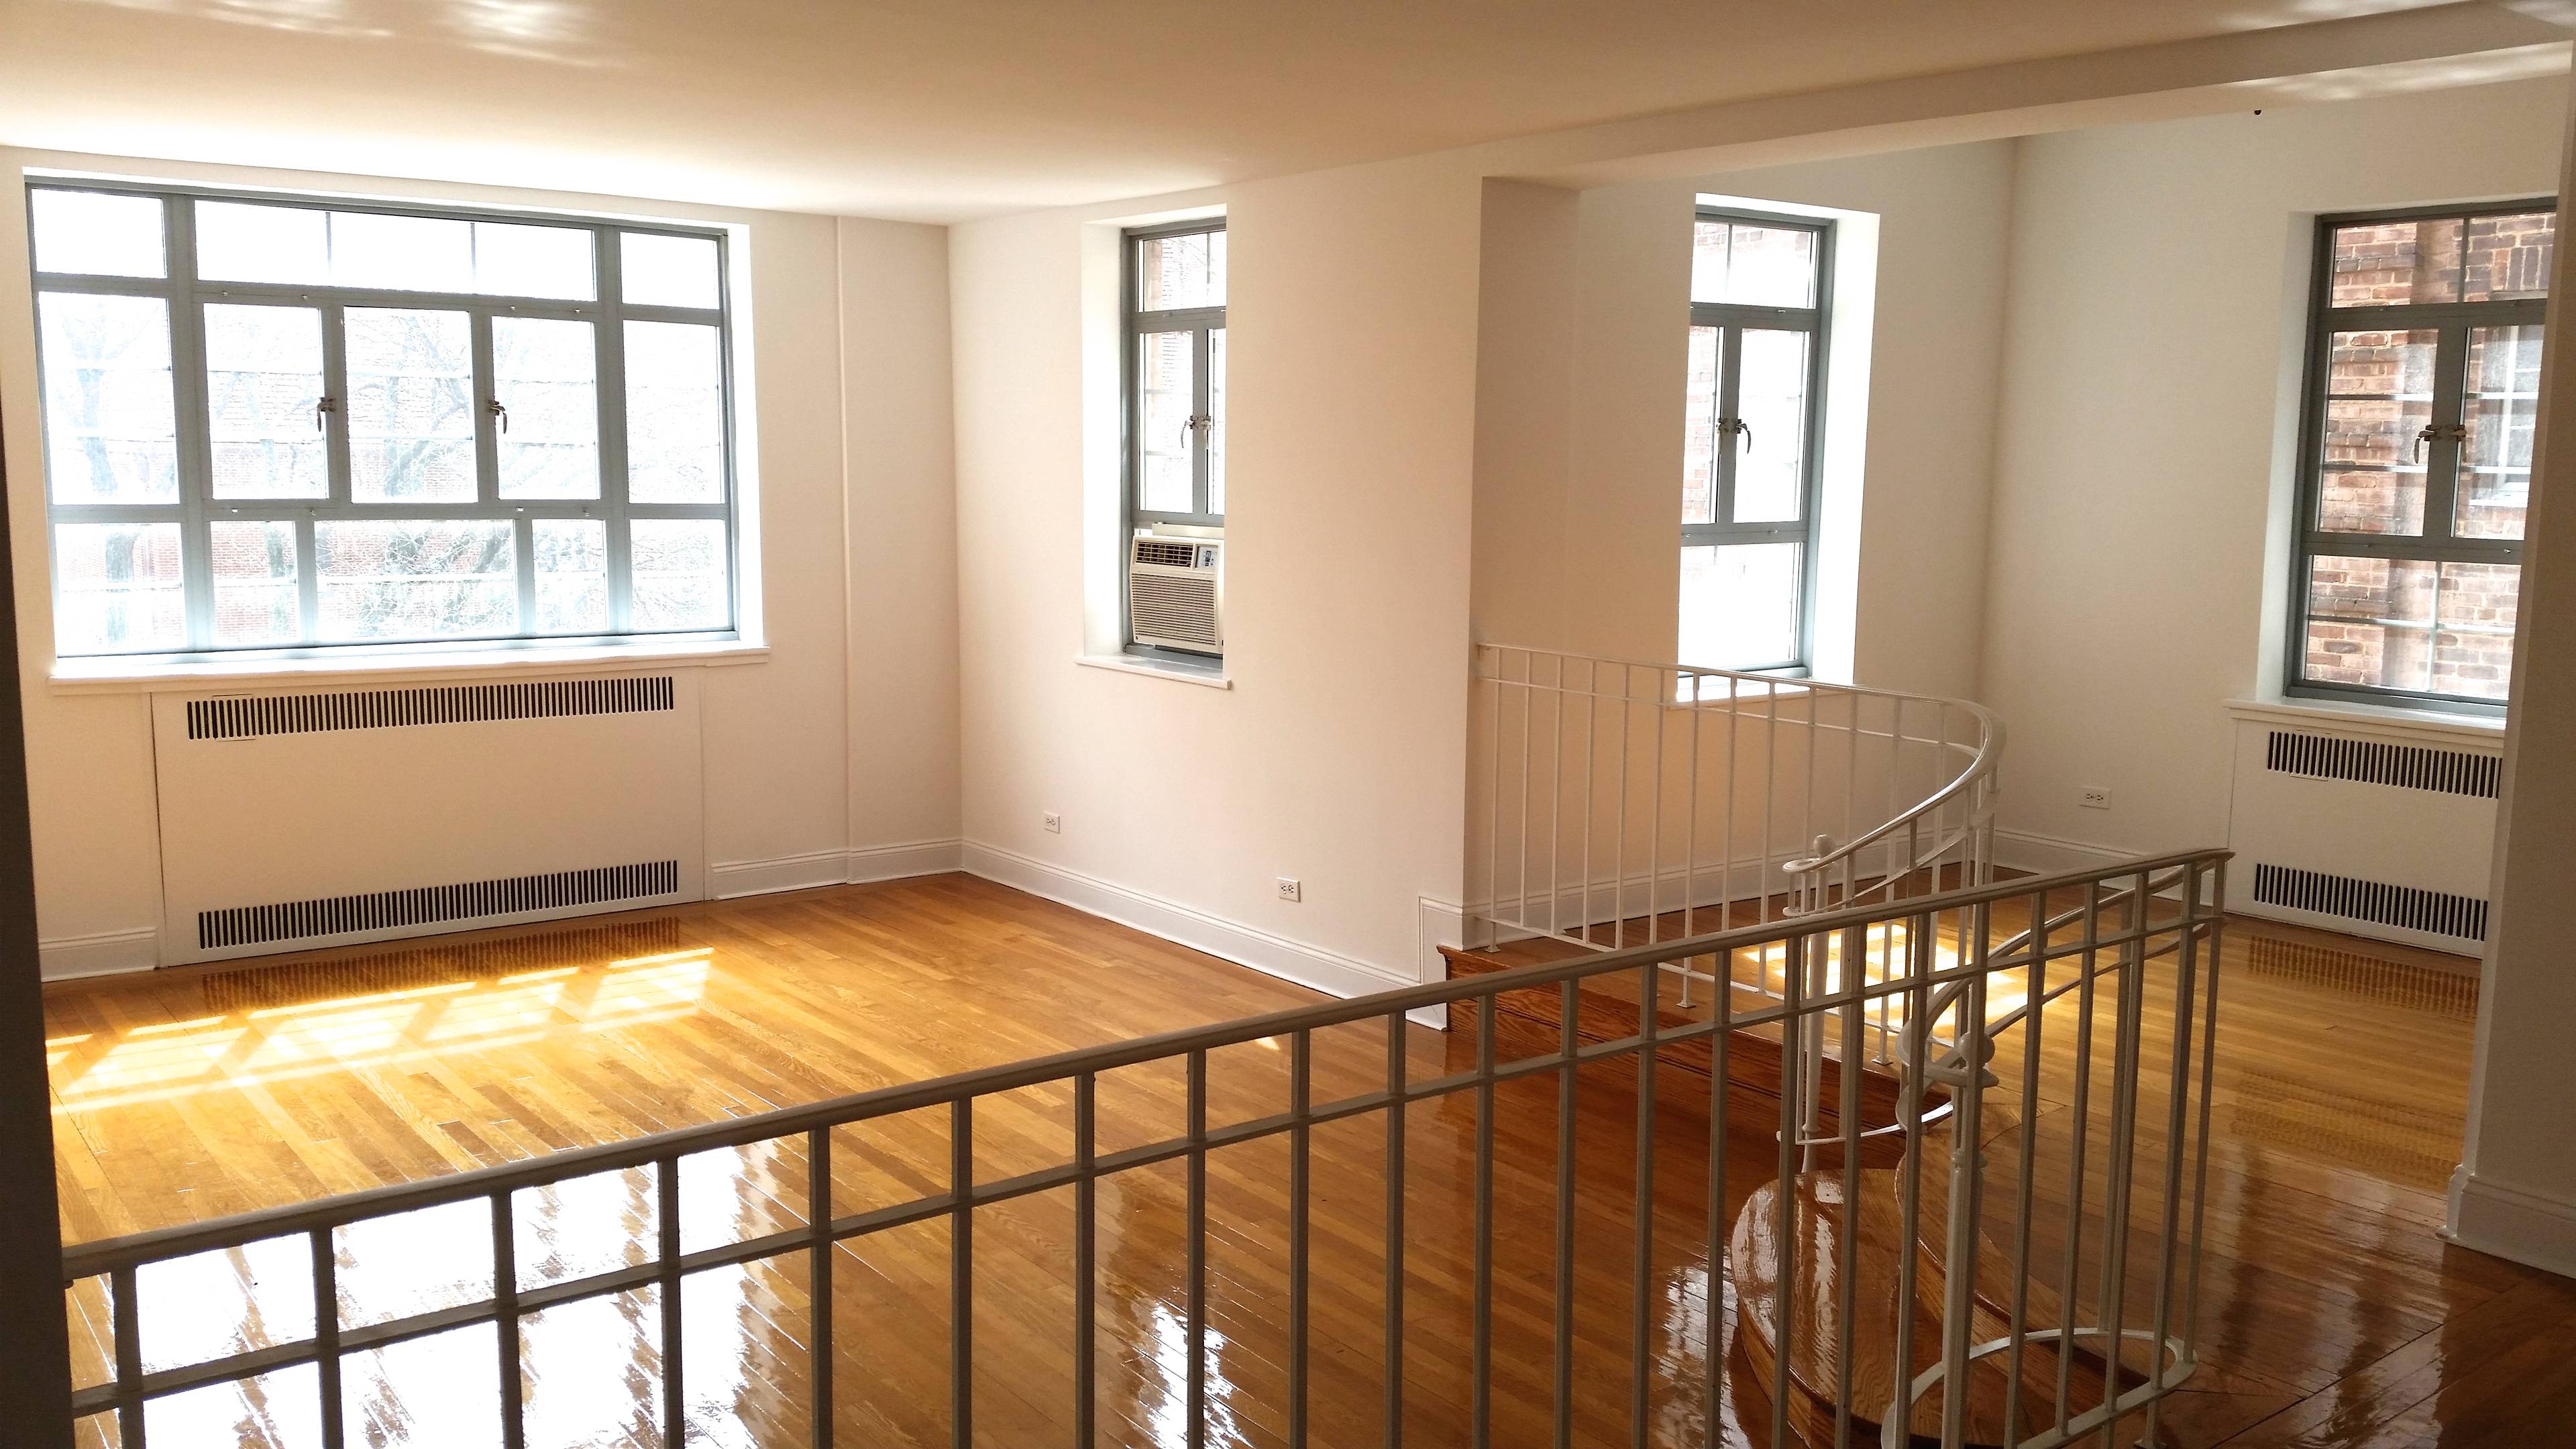 Sun Drenched Massive 2-Bedroom/2-Bath Apartment in Forest Hills Gardens.  A MUST SEE.